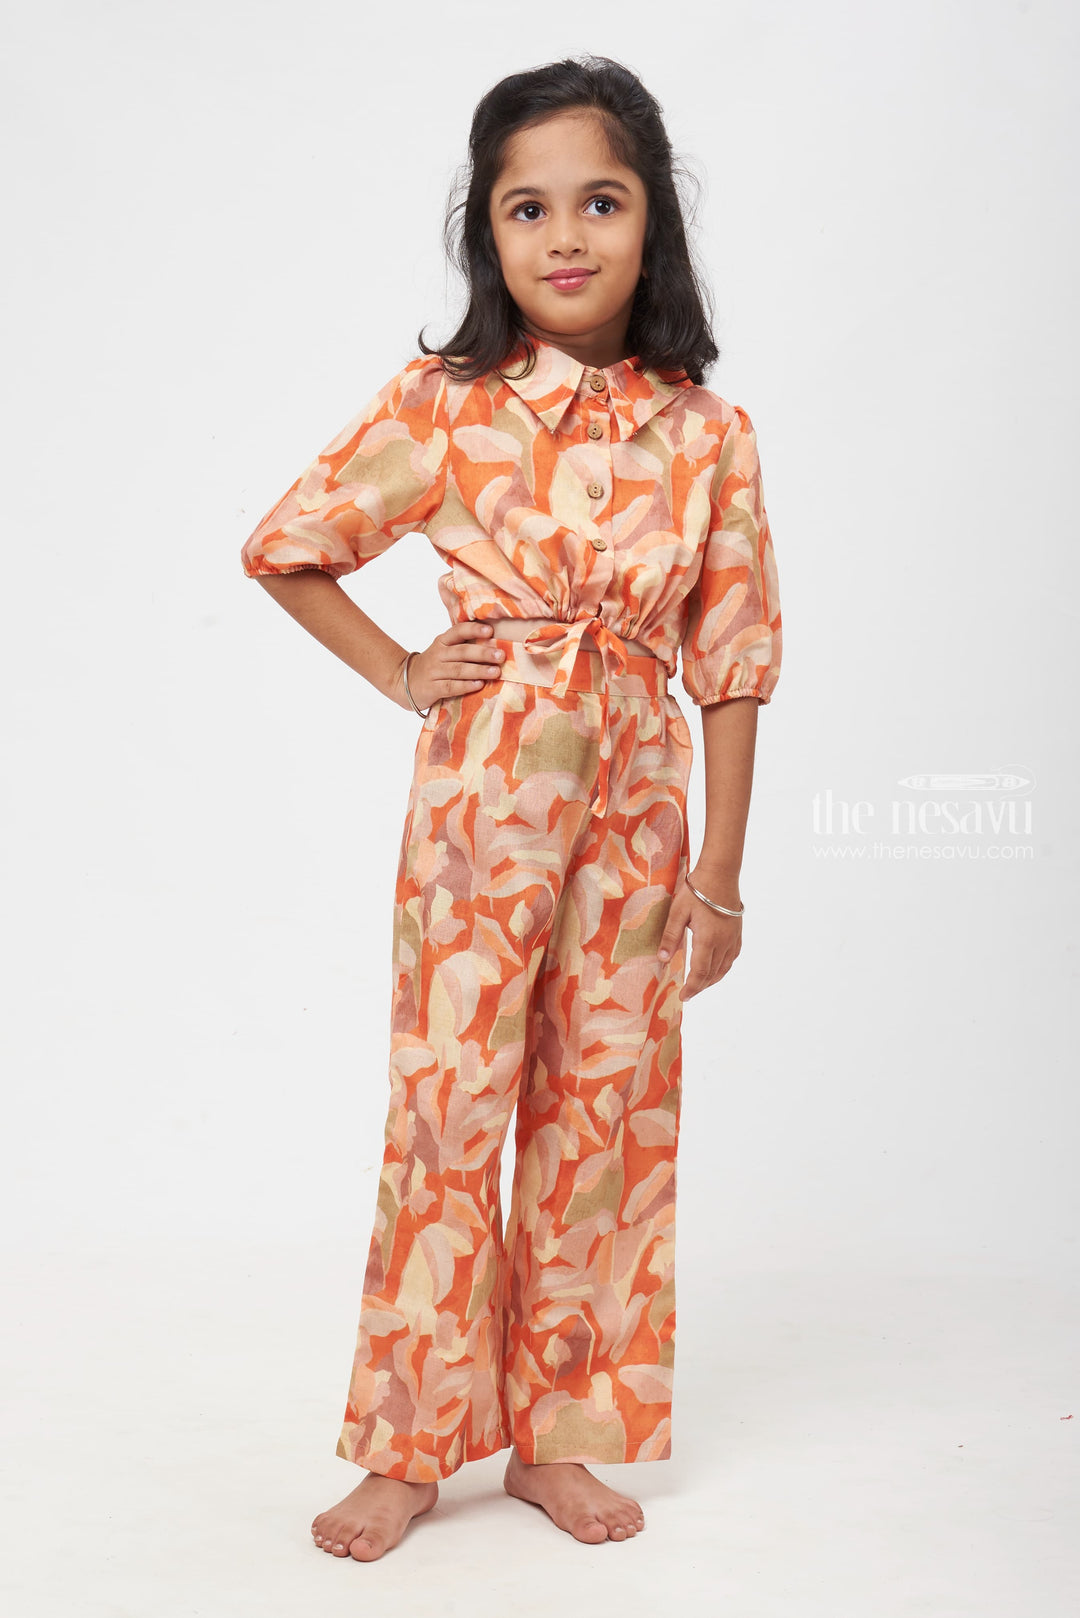 The Nesavu Girls Sharara / Plazo Set Orange Watercolor Elegance Two-Piece Outfit with Whimsical Patterns for Girls Nesavu 24 (5Y) / Orange / linen cotton GPS211A-24 Watercolor-Inspired Two-Piece Set | Artistic Kids Wear Collection | Trendy Tots - The Nesavu